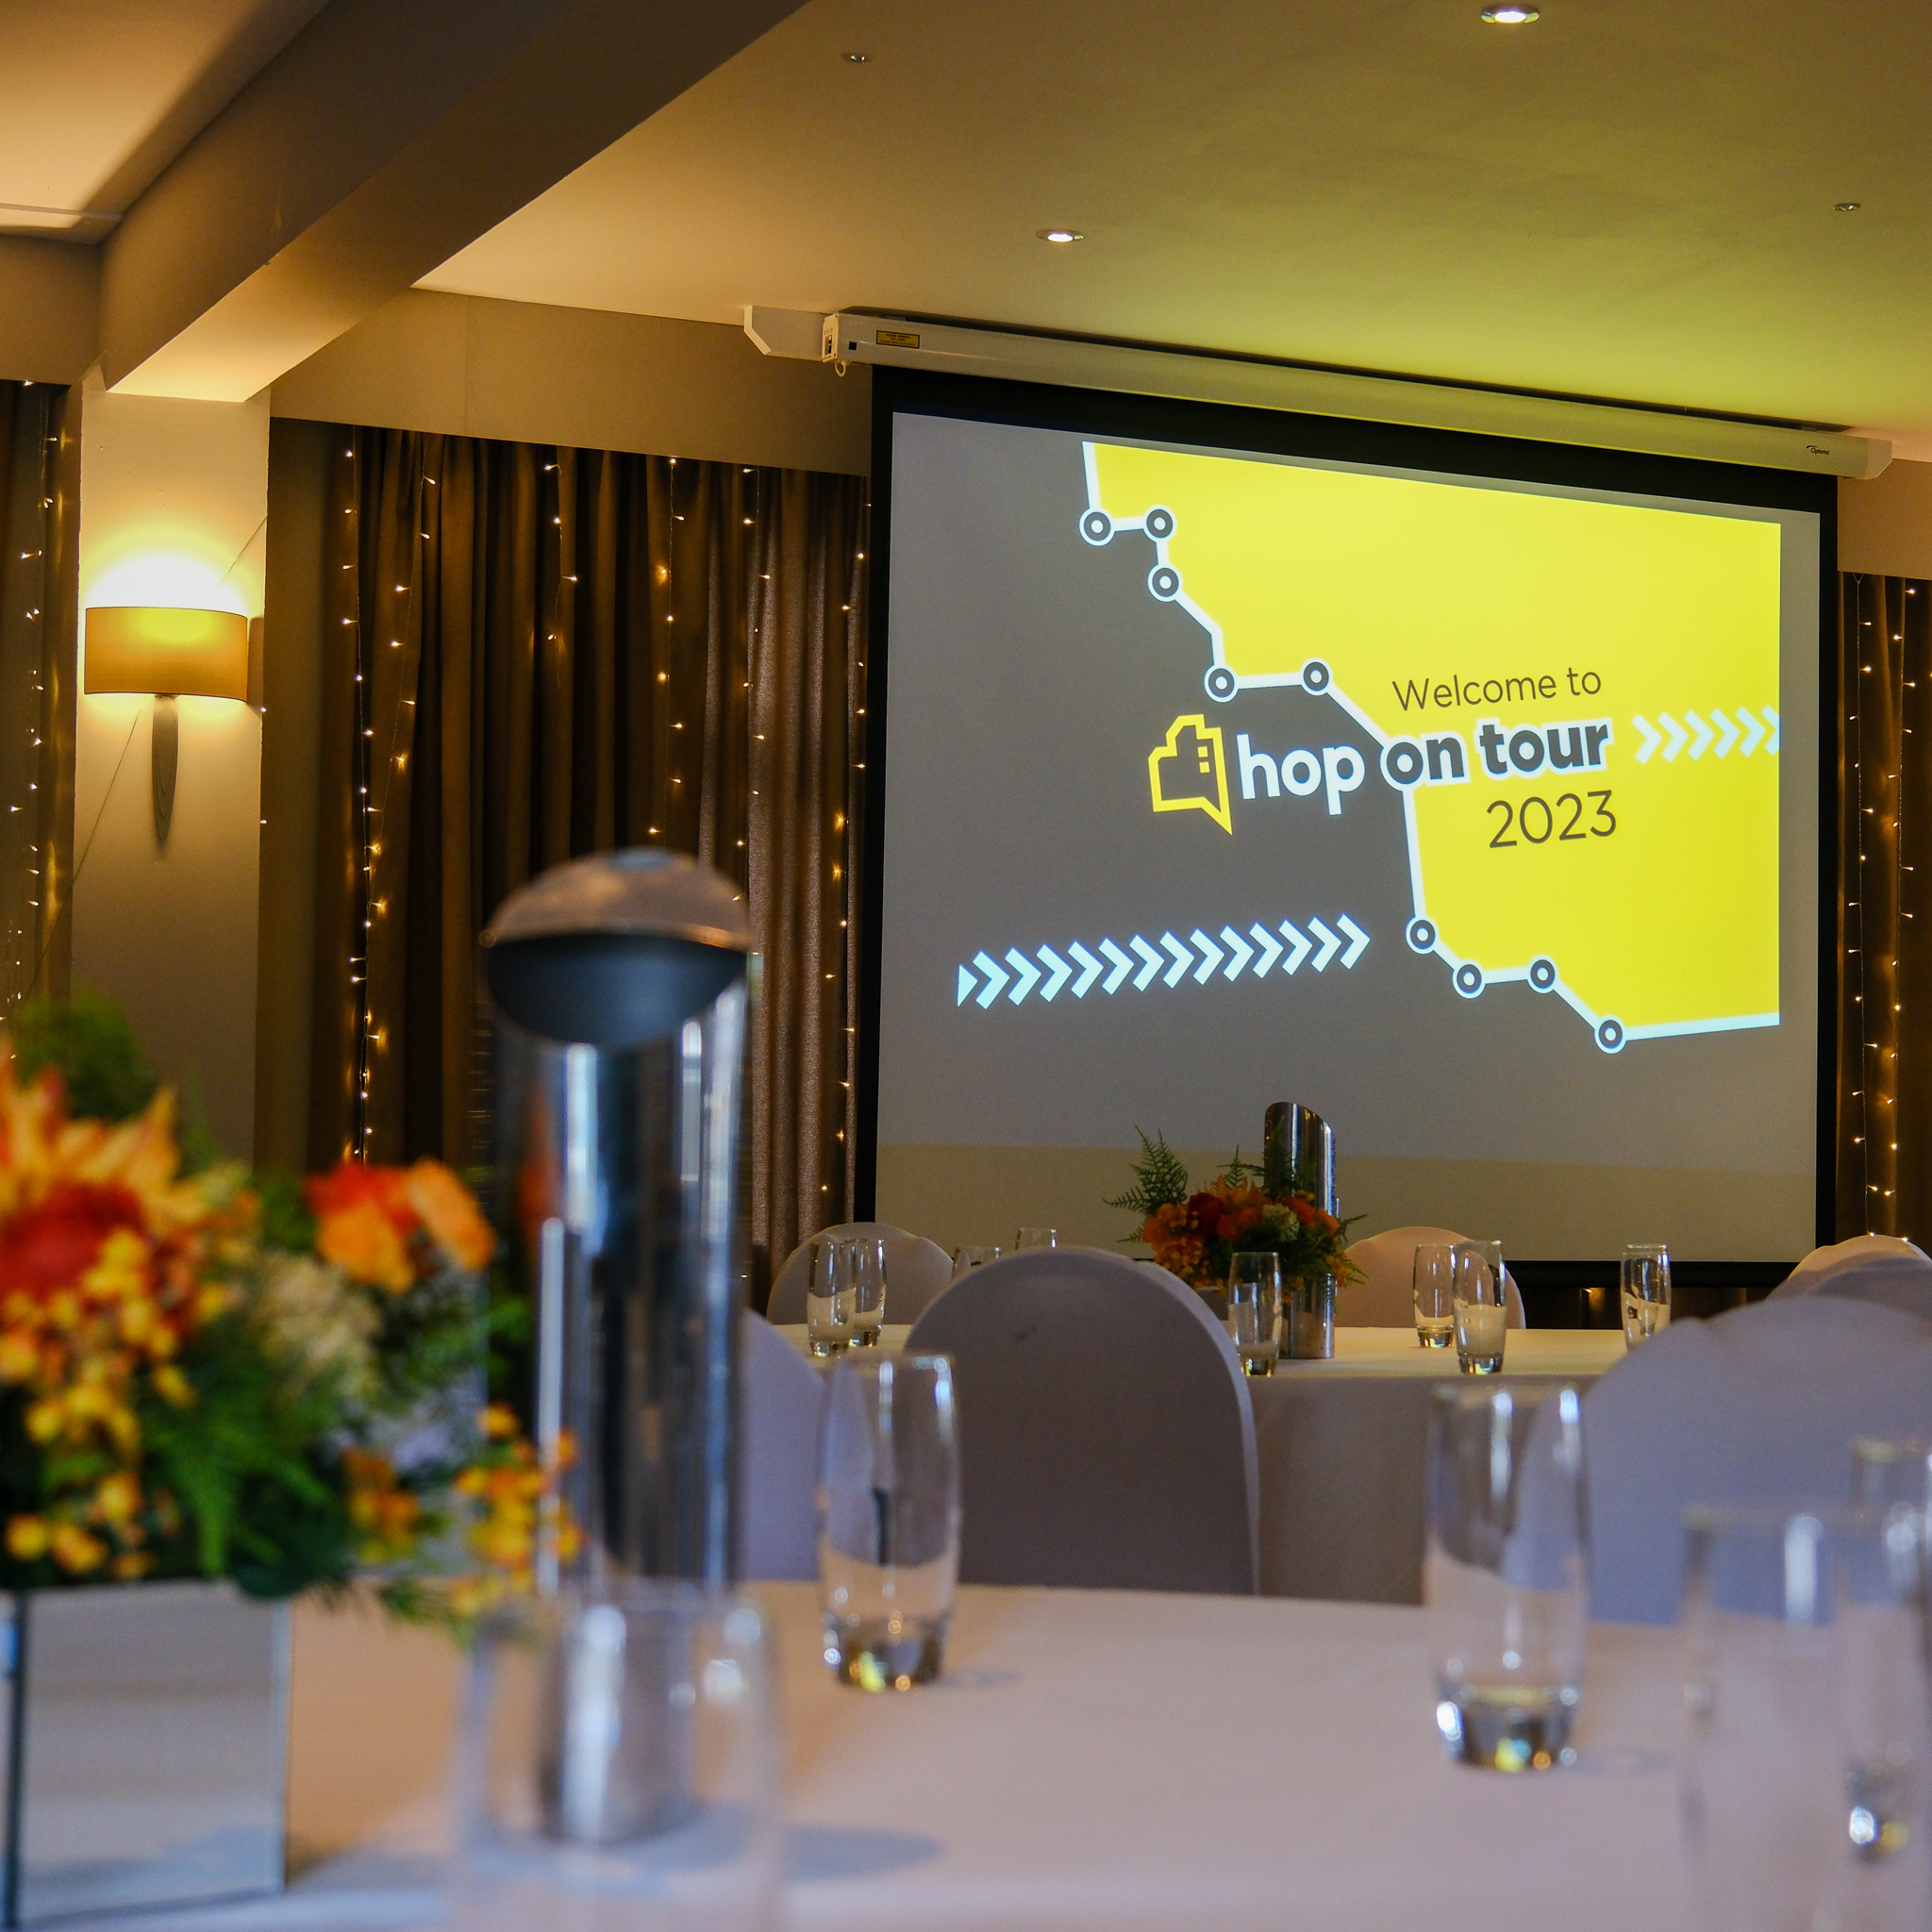 Meeting & Events at the Glen Mhor Hotel